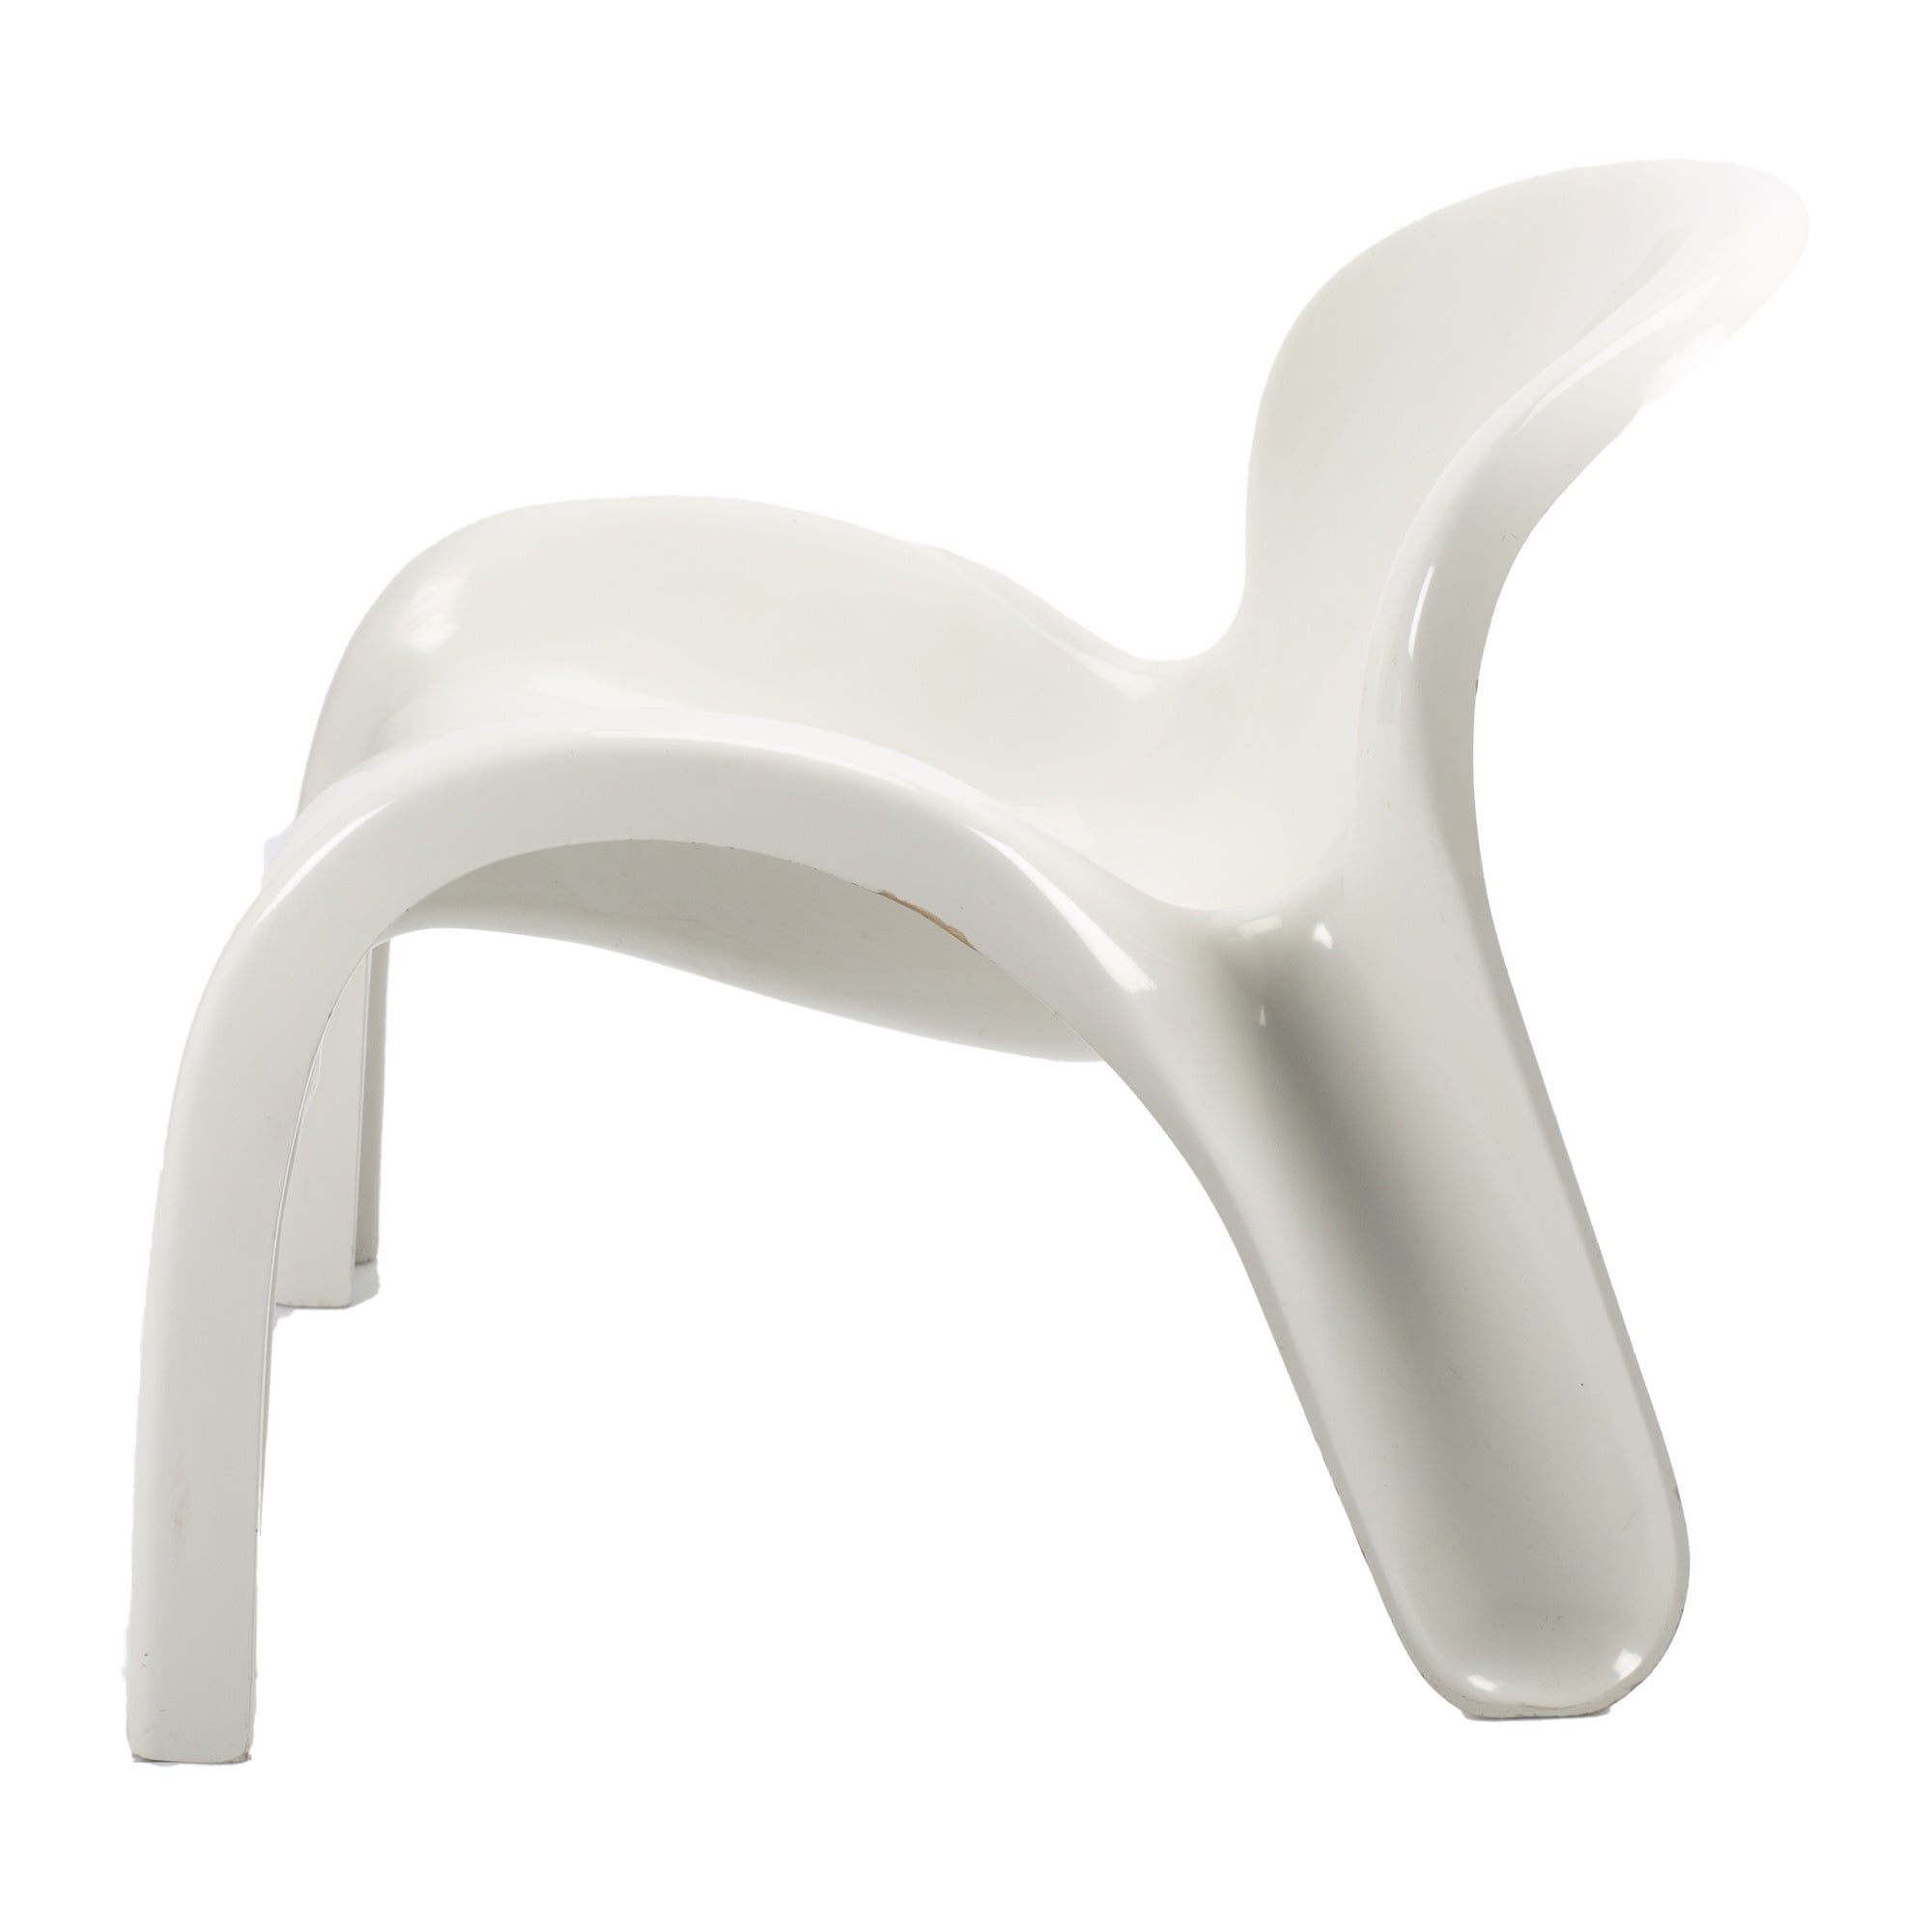 White GN2 Chair by Peter Ghyczy for Reuter's Form and Life